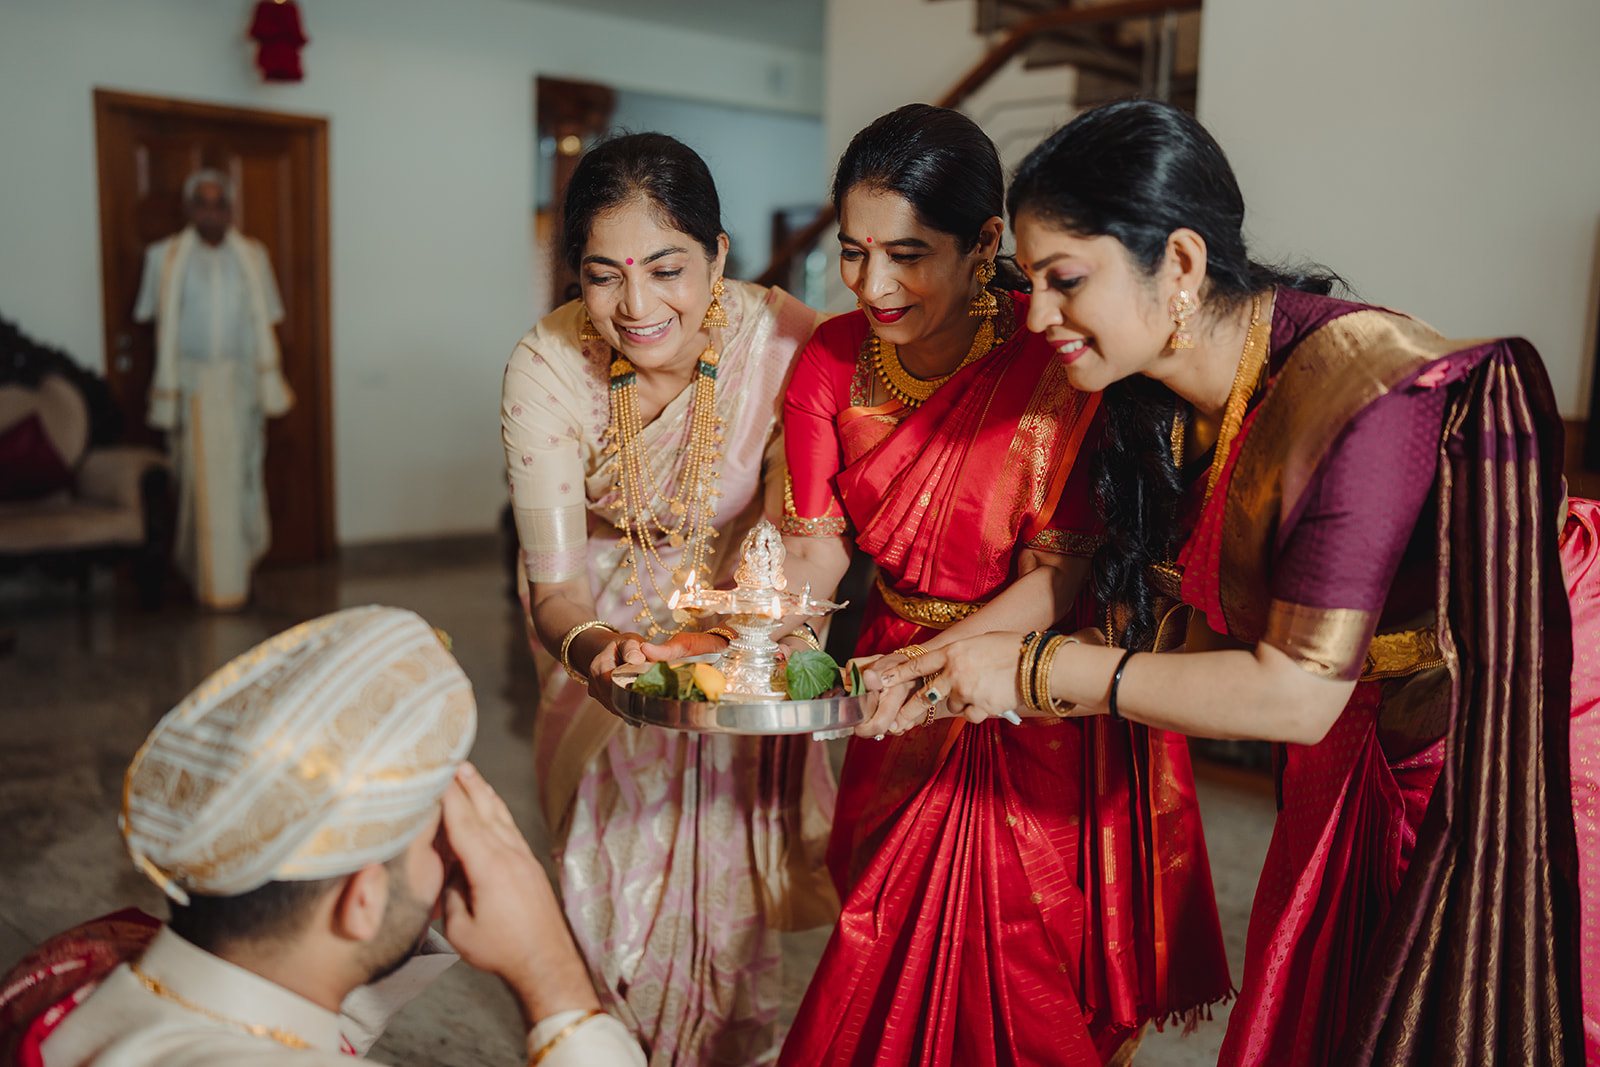 Blessings in light: Groom receives Arathi in a heartfelt and sacred ceremony from his family members
